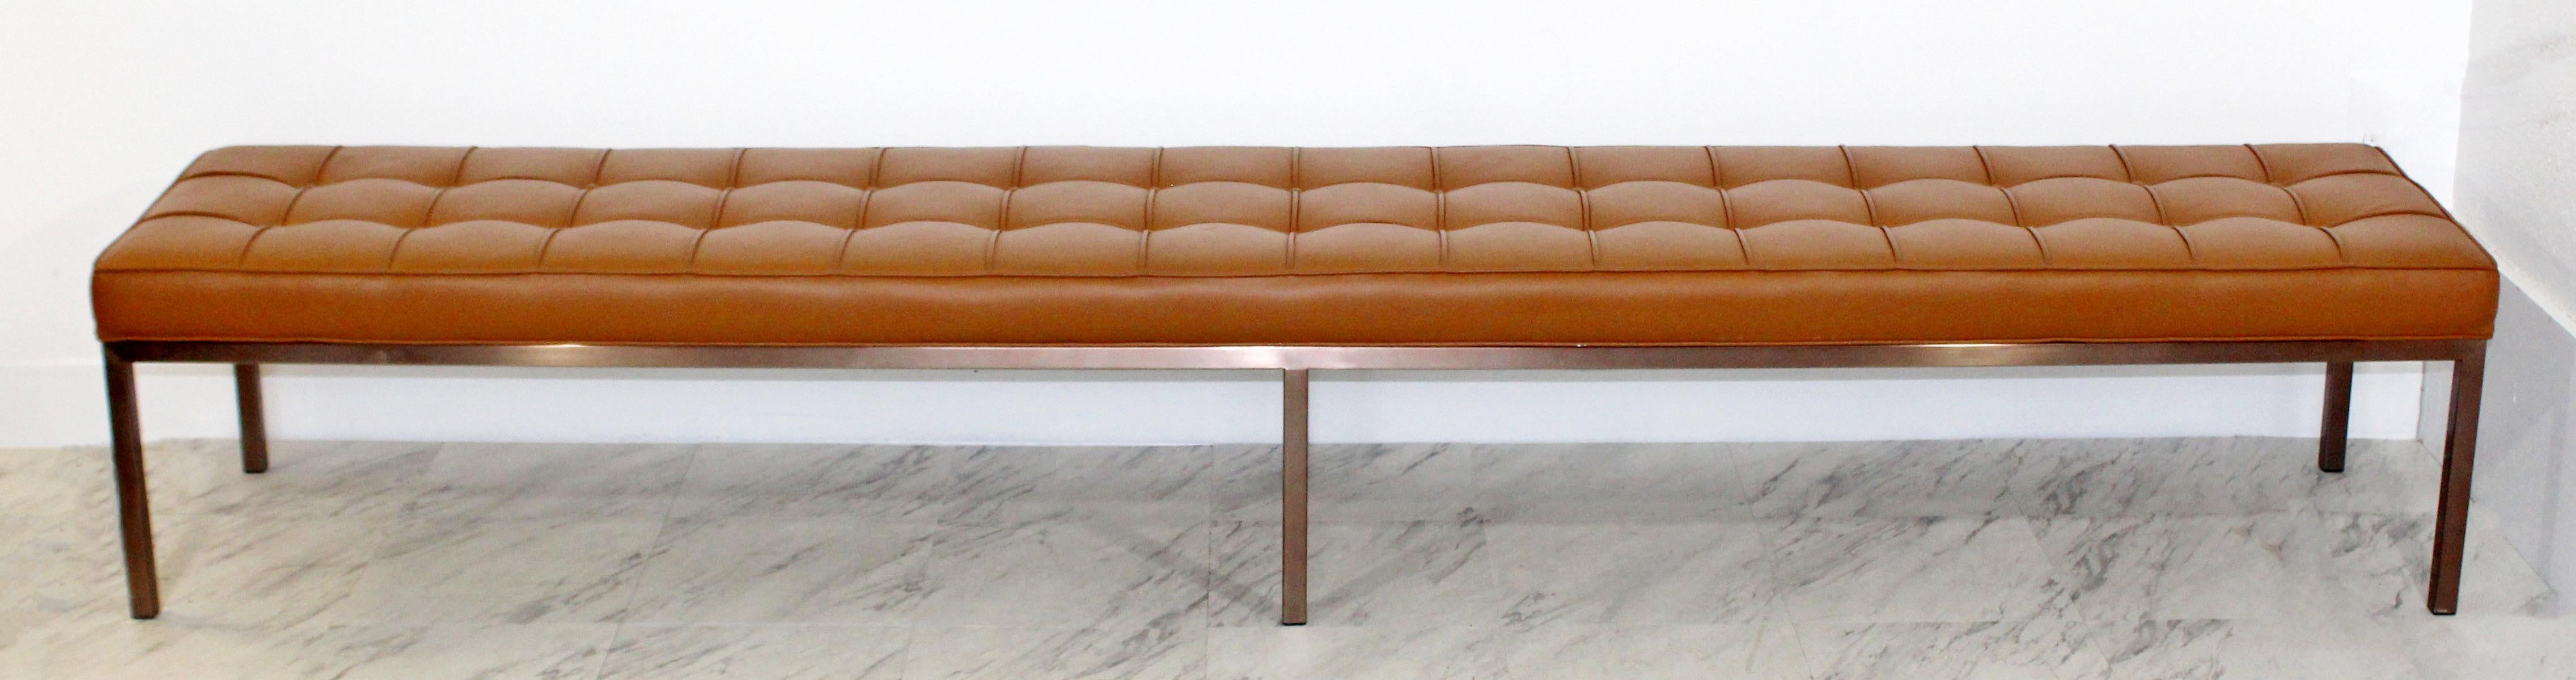 leather long bench